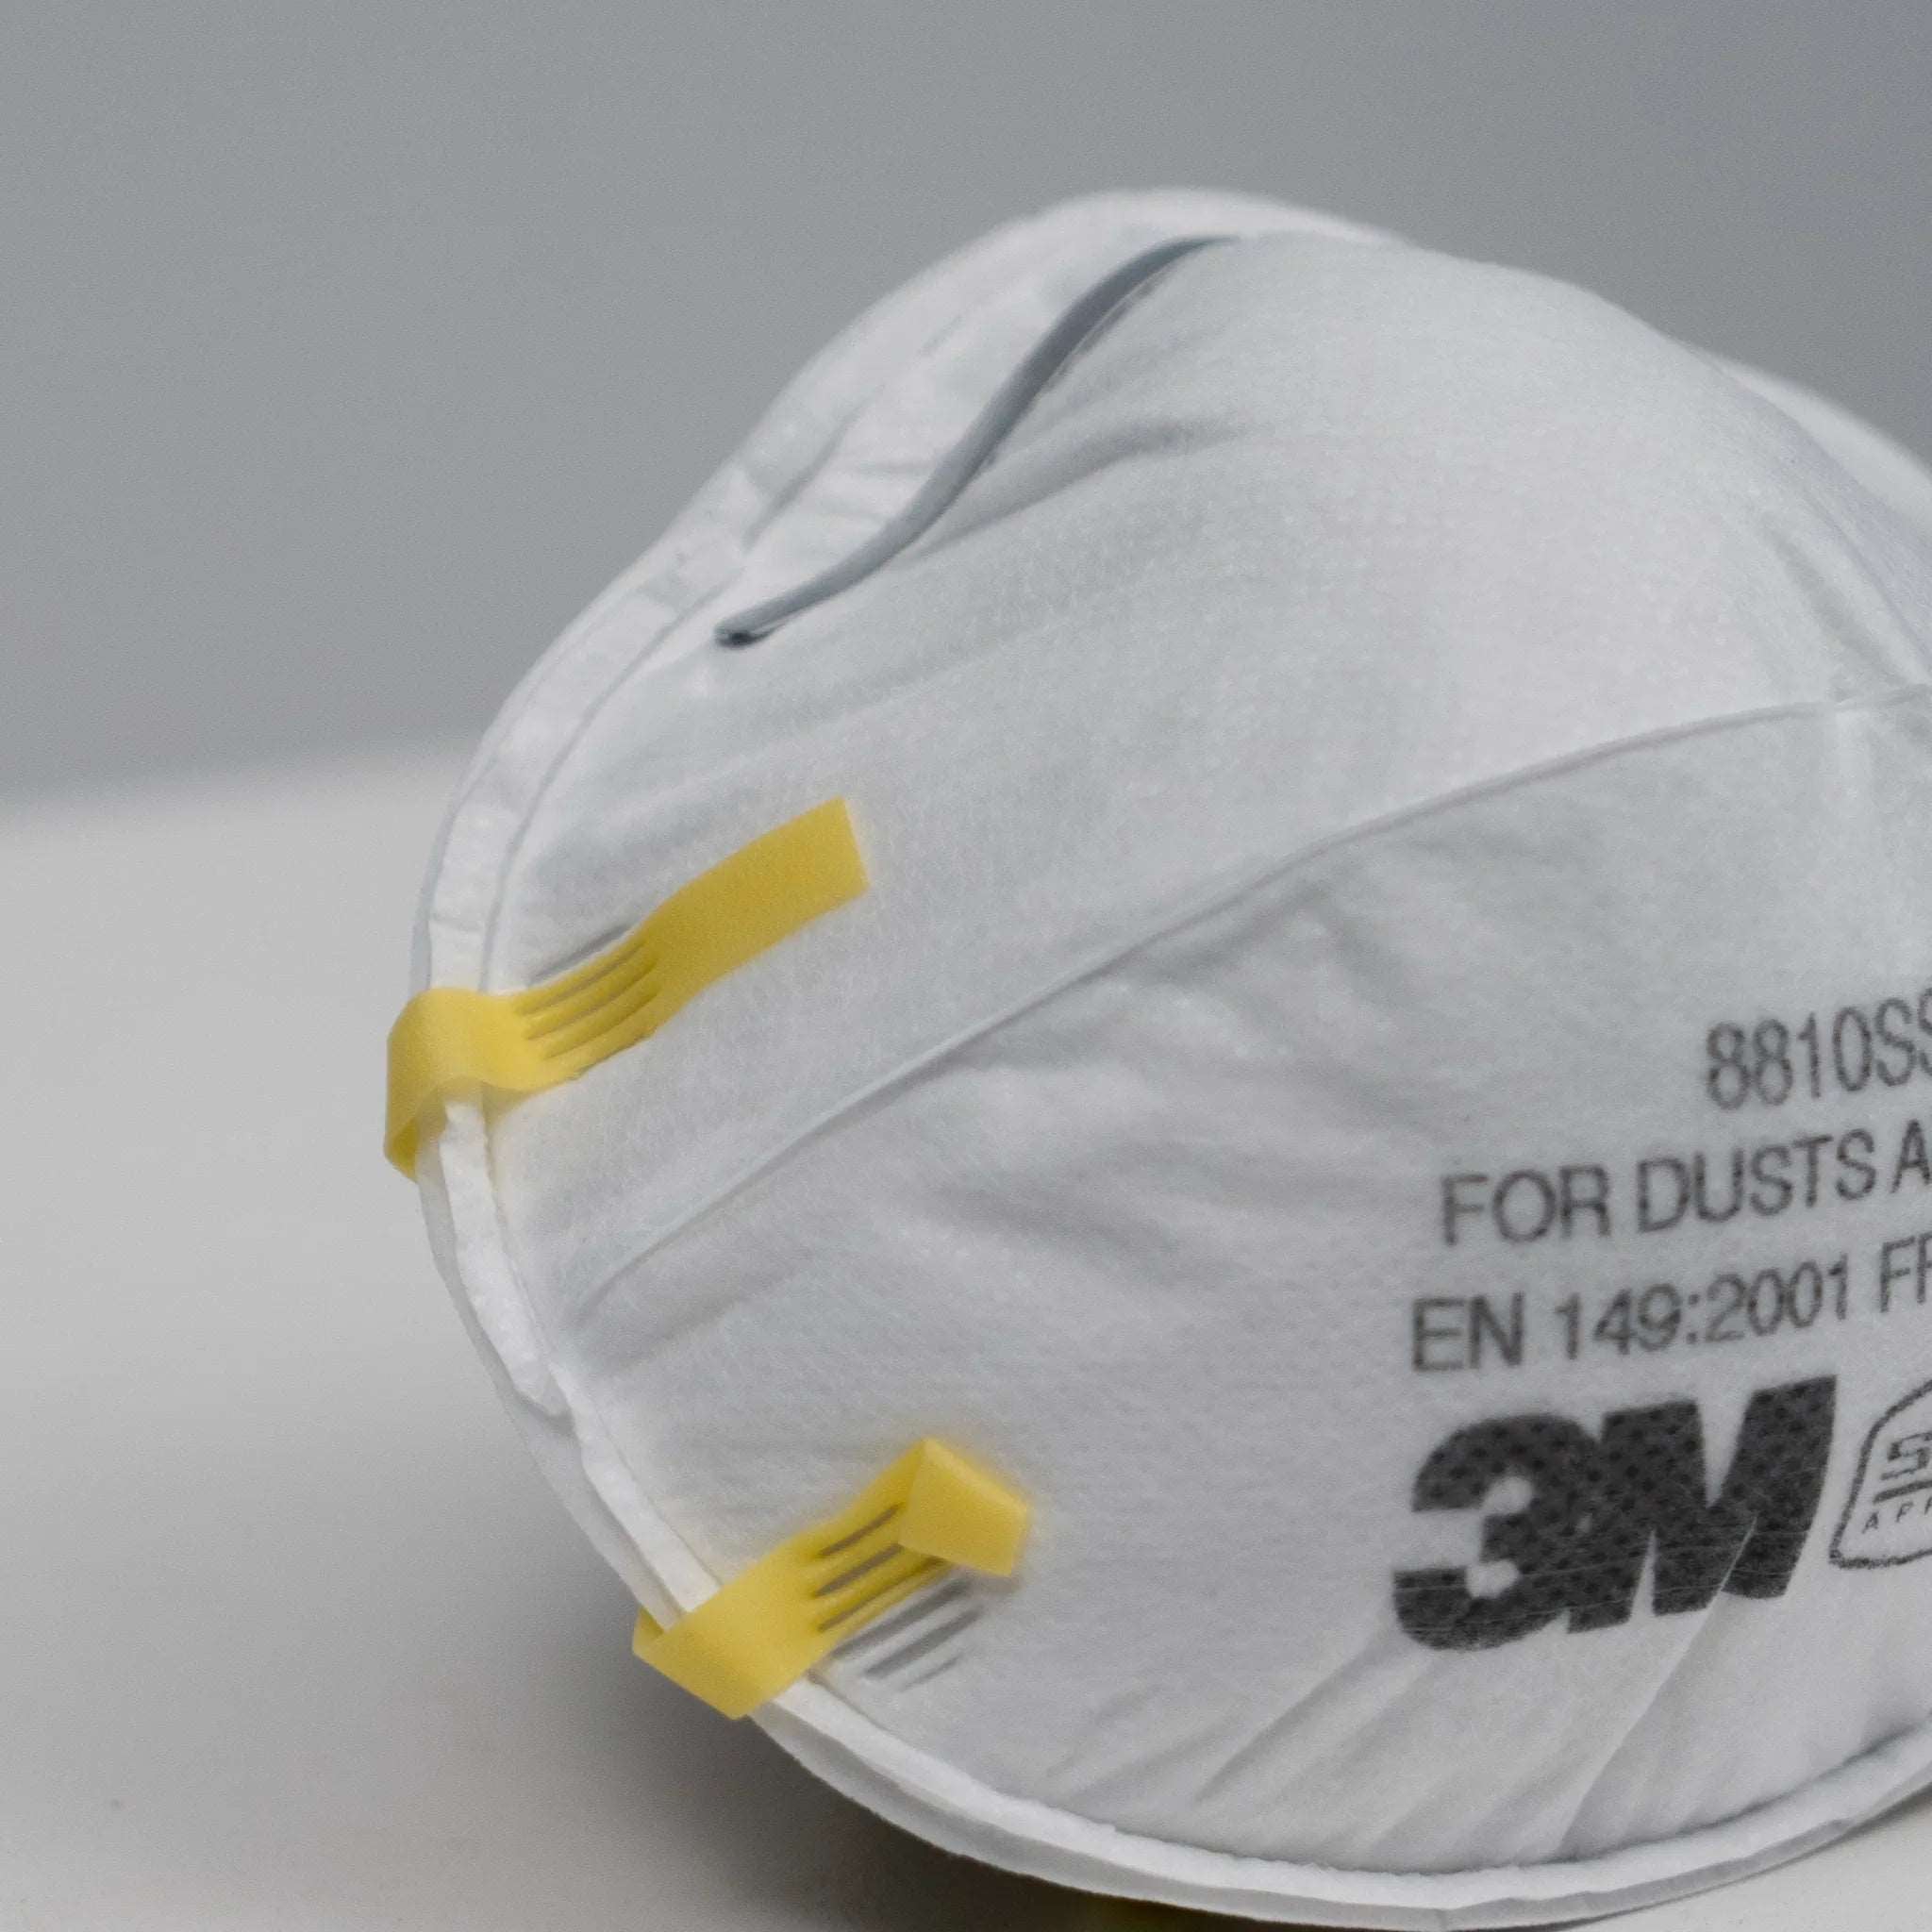 3M Disposable Respirator Mask 8810 20 Pack Power Tool Services